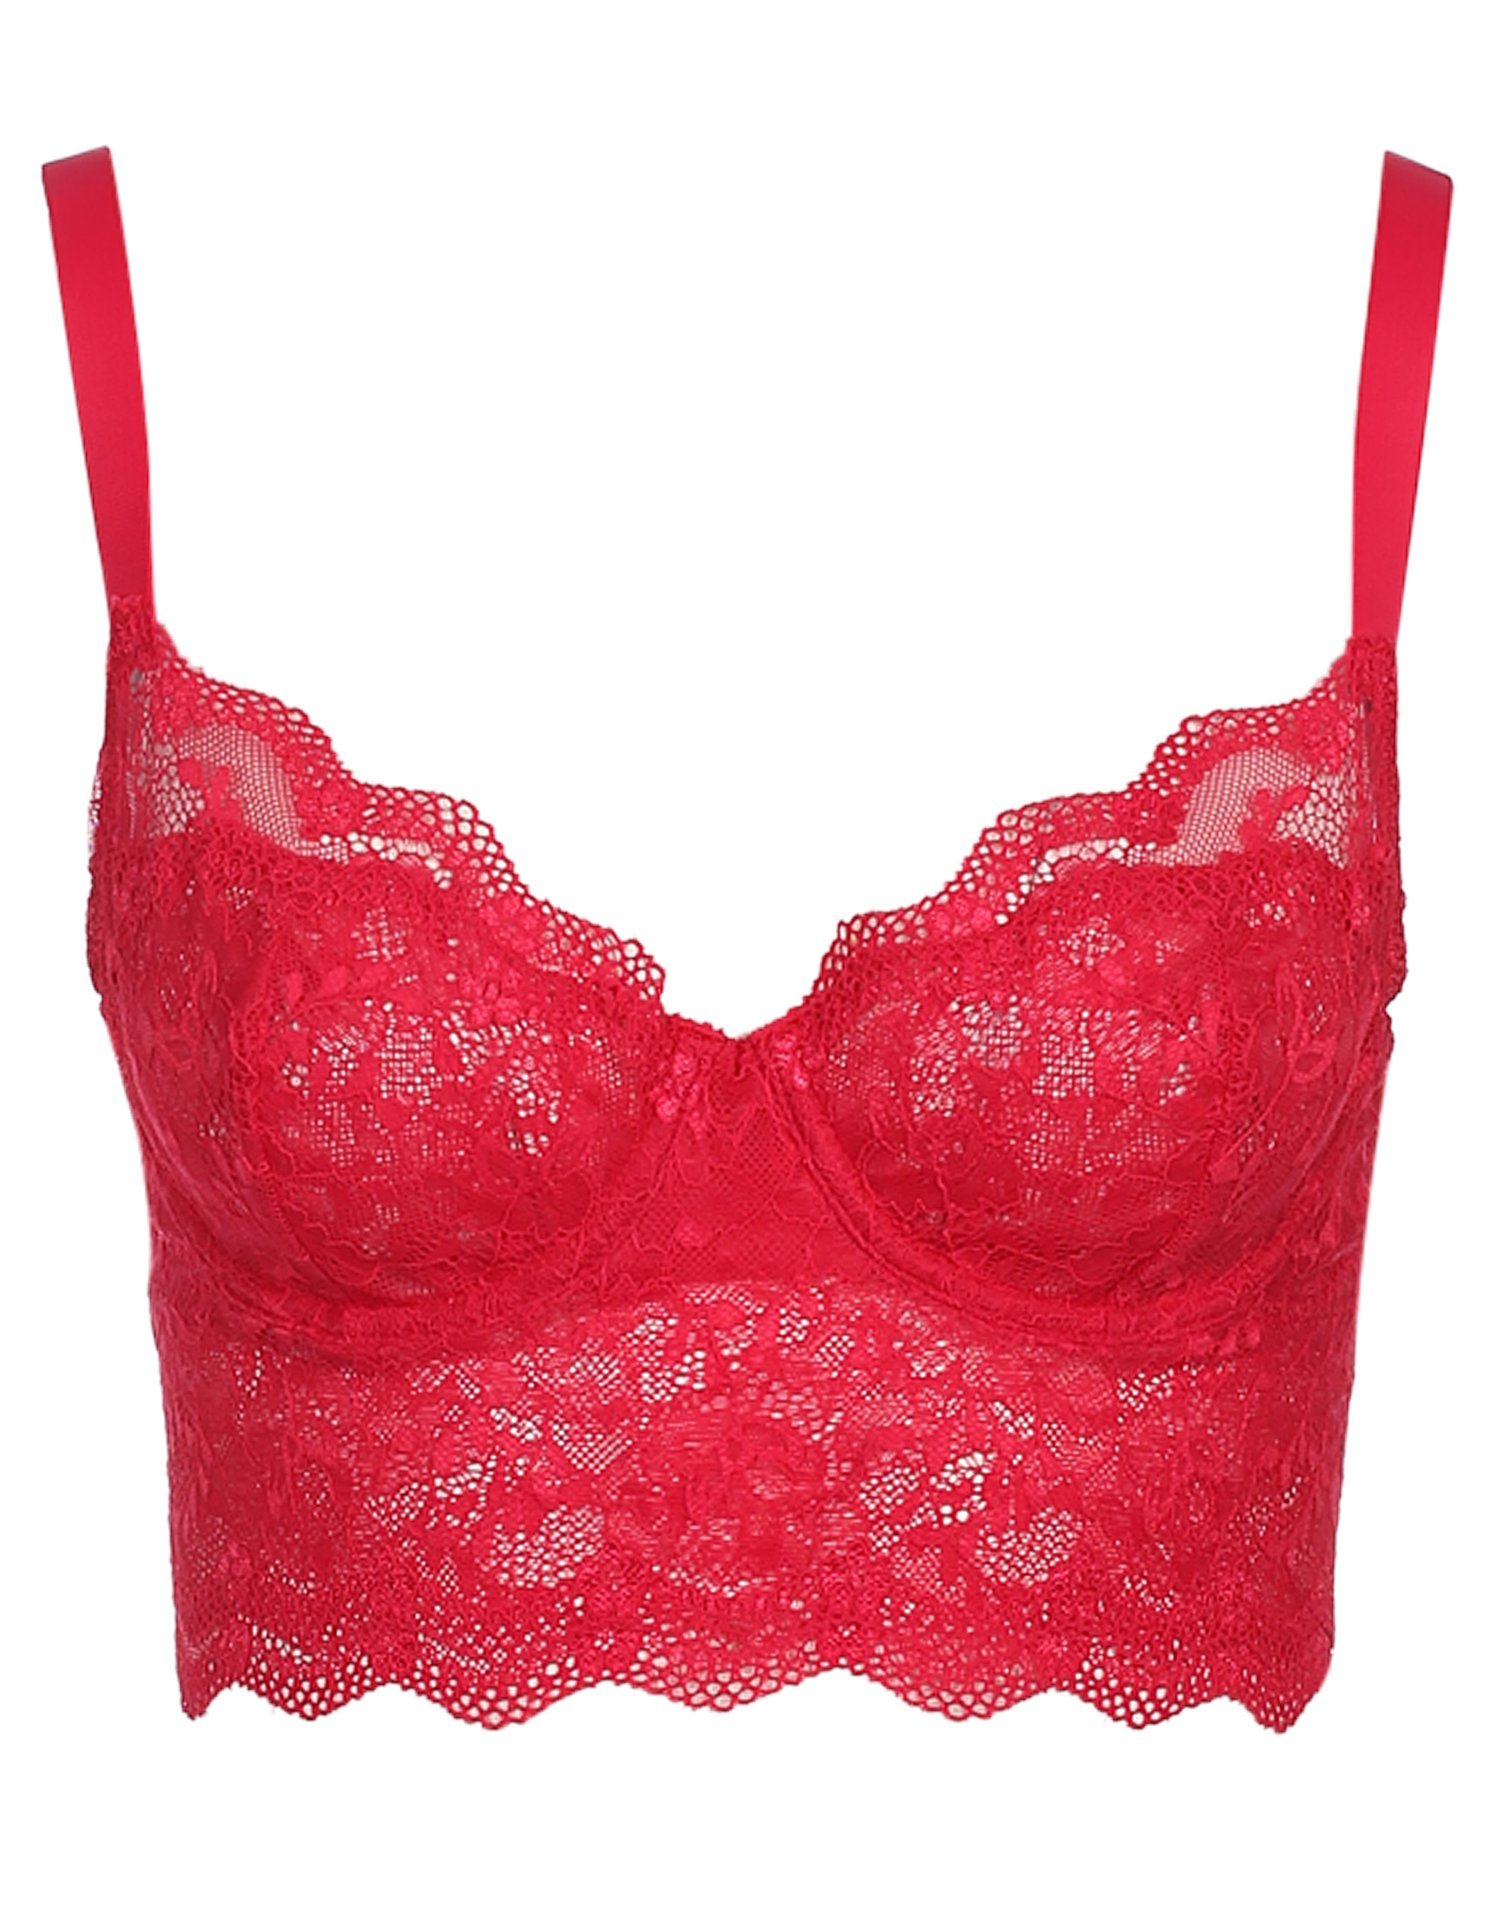 Delicate Strap Bustier - Nly Lingerie - Red - Bras & Tops - Underwear ...